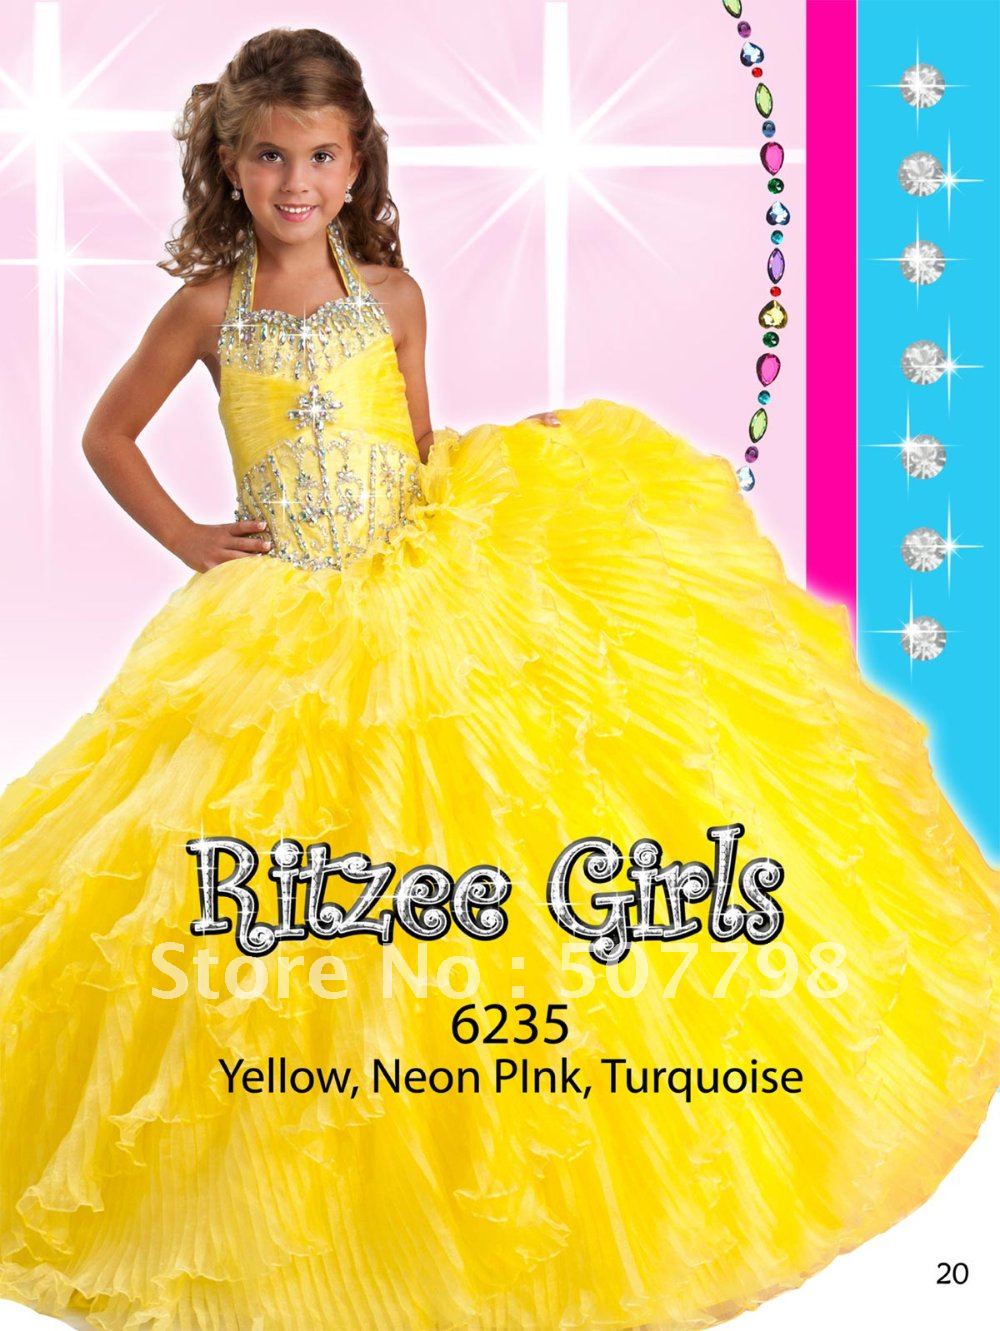 goldren halter pleated organza long queen's pageant dress,new style flower girl dress, special ocassion dress for girl